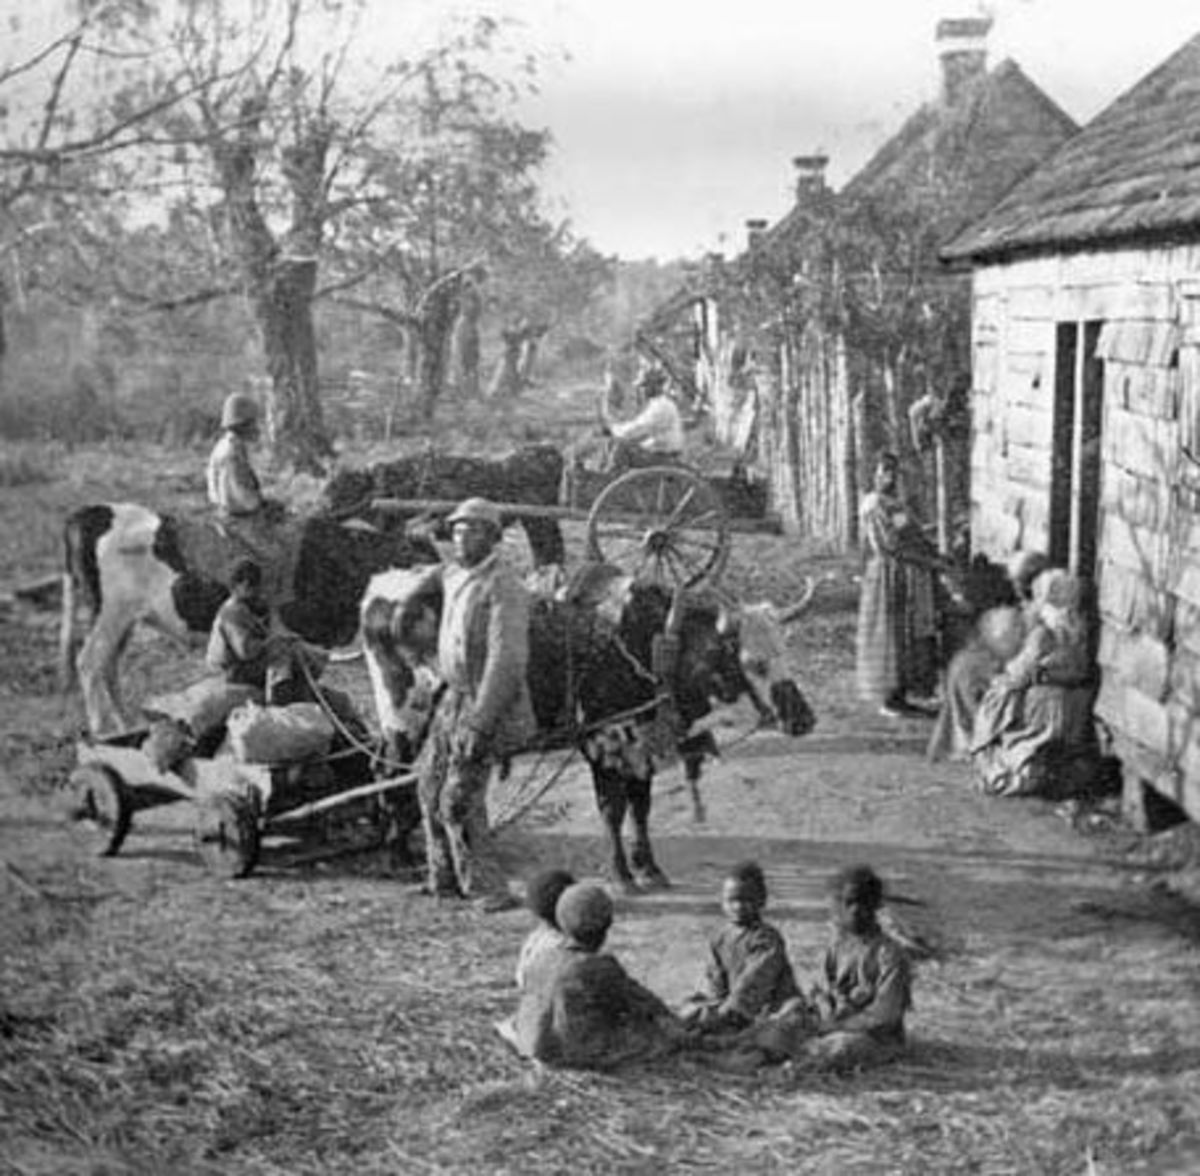 Slaves gather around their quarters at the end of the workday